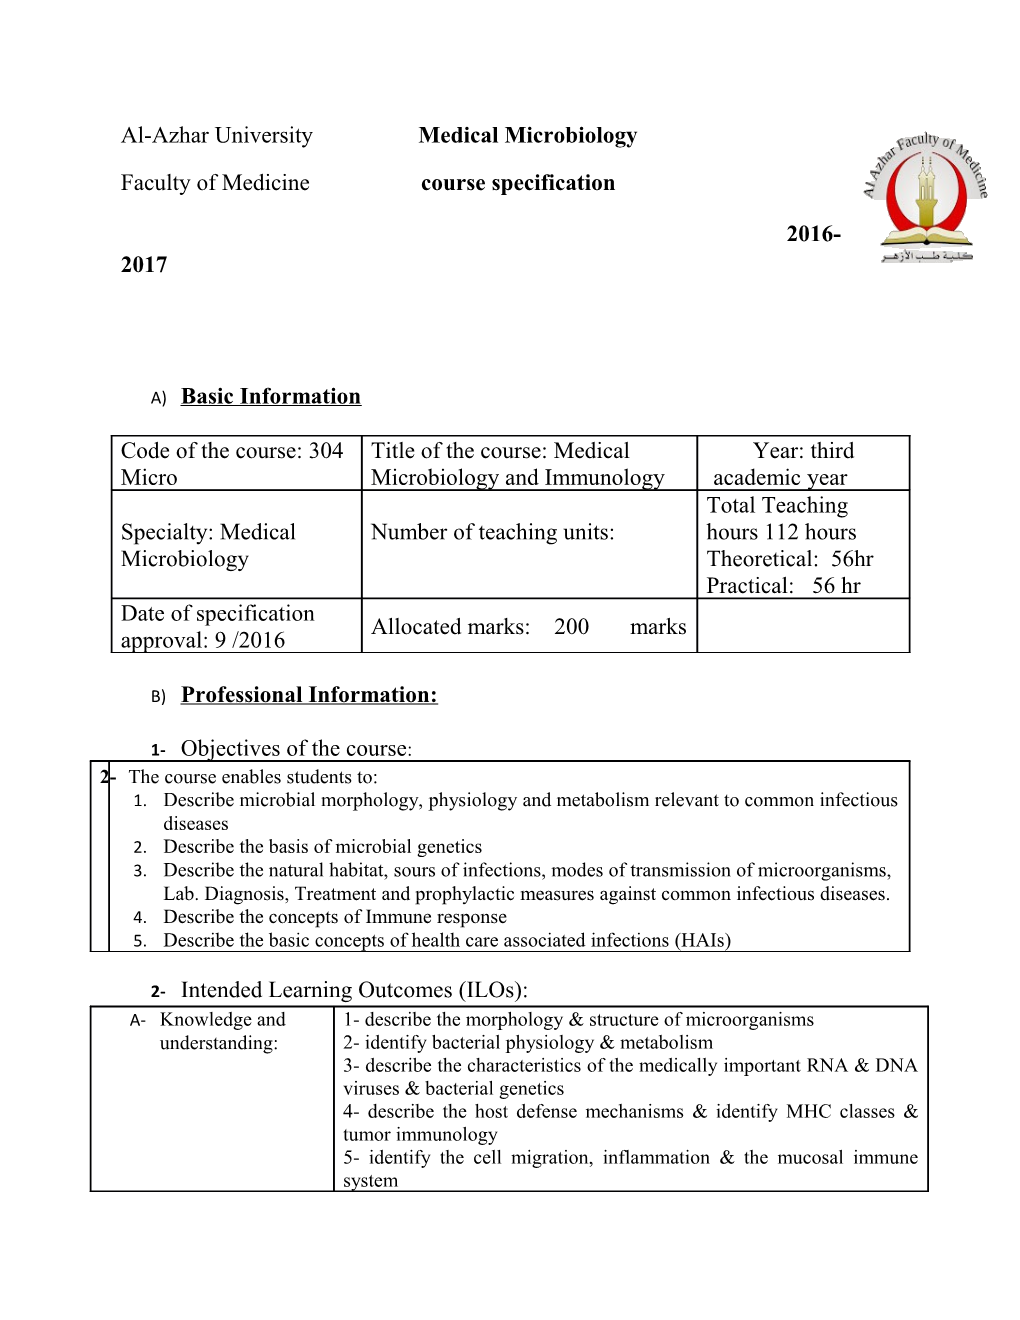 Faculty of Medicine Course Specification